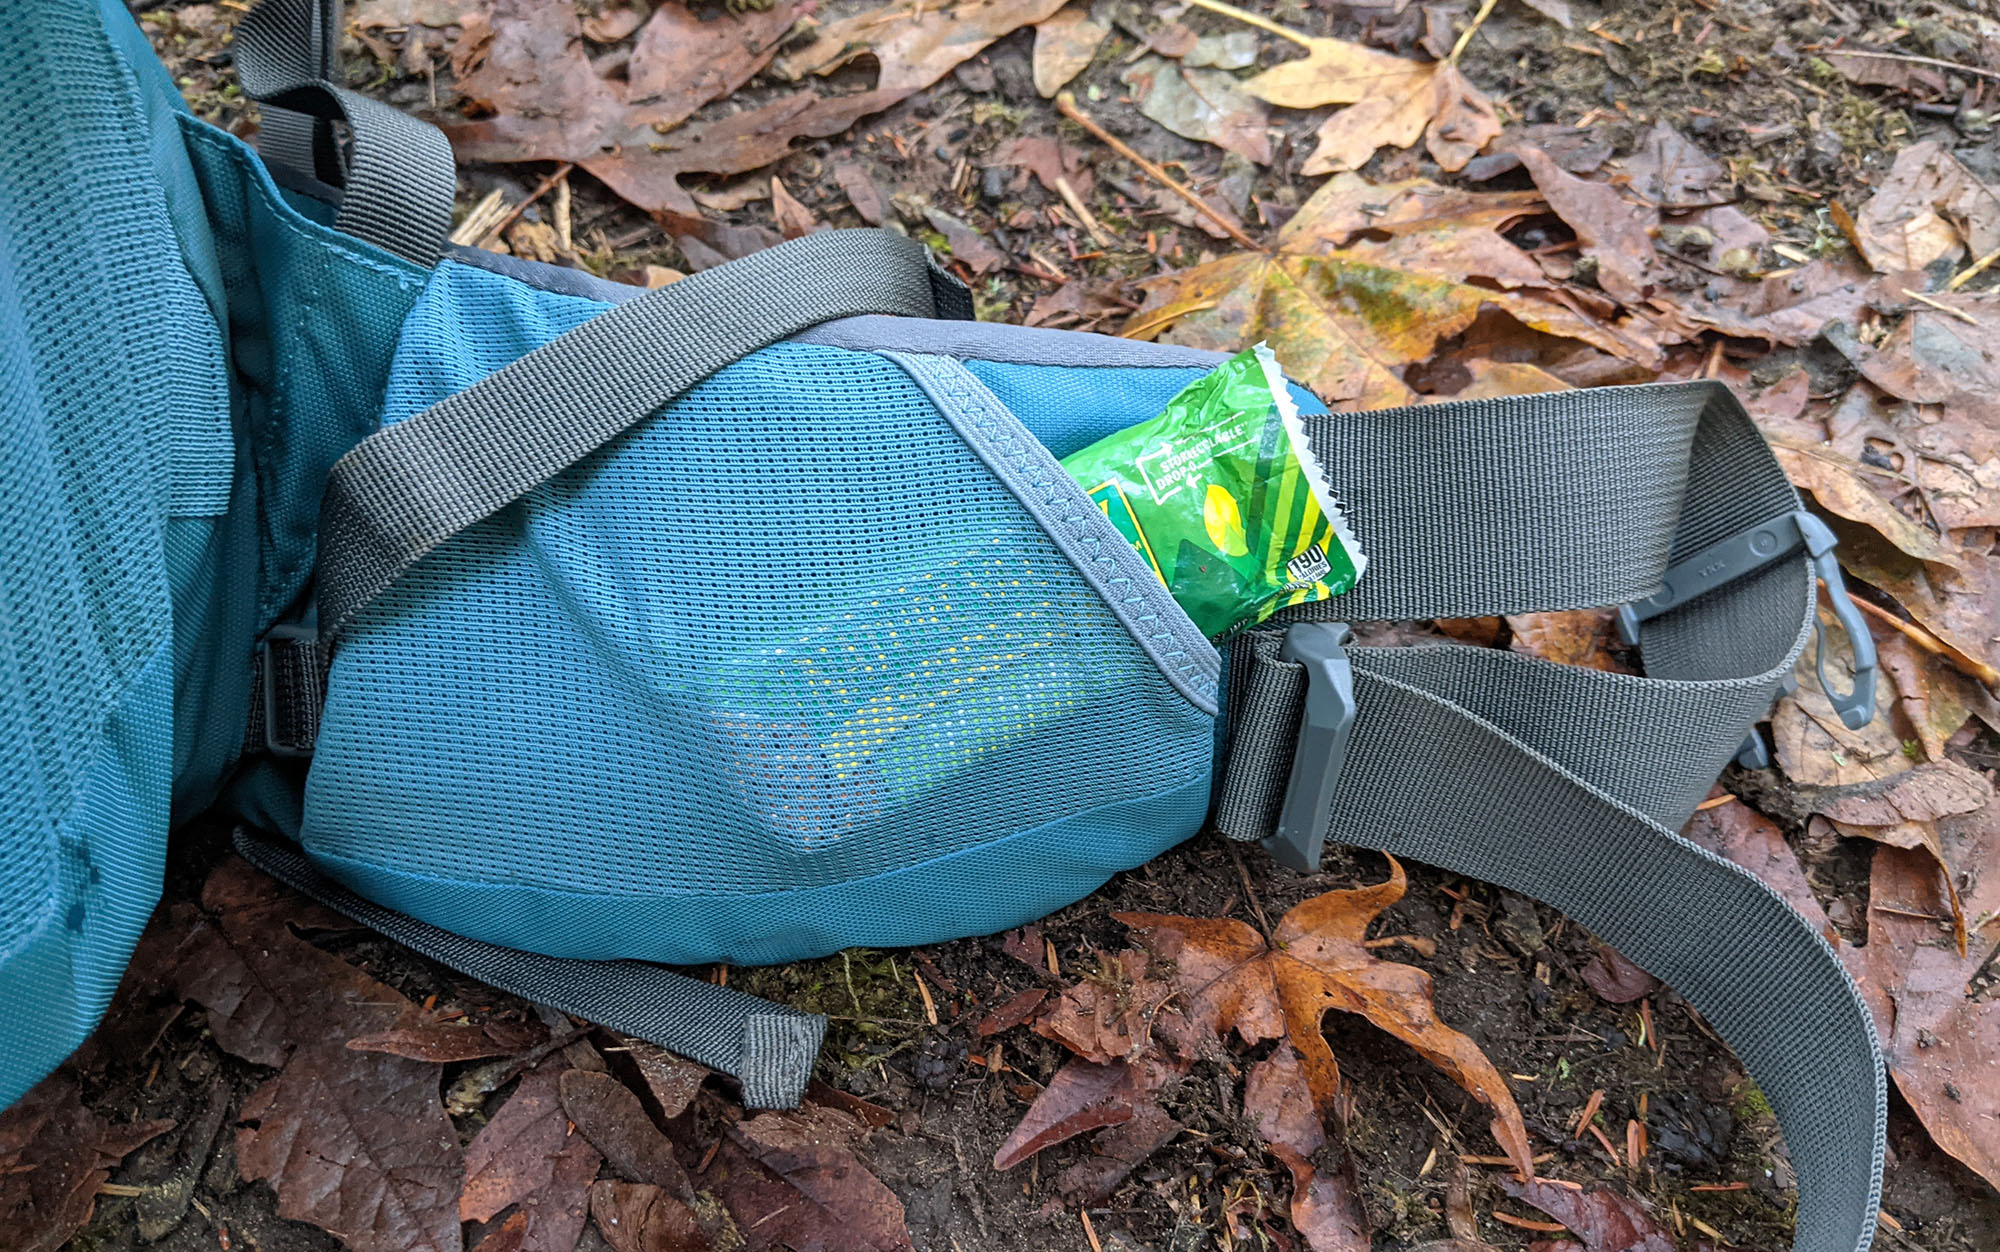 A granola bar sticks out of the Coyote's right hip belt mesh stretch pocket.